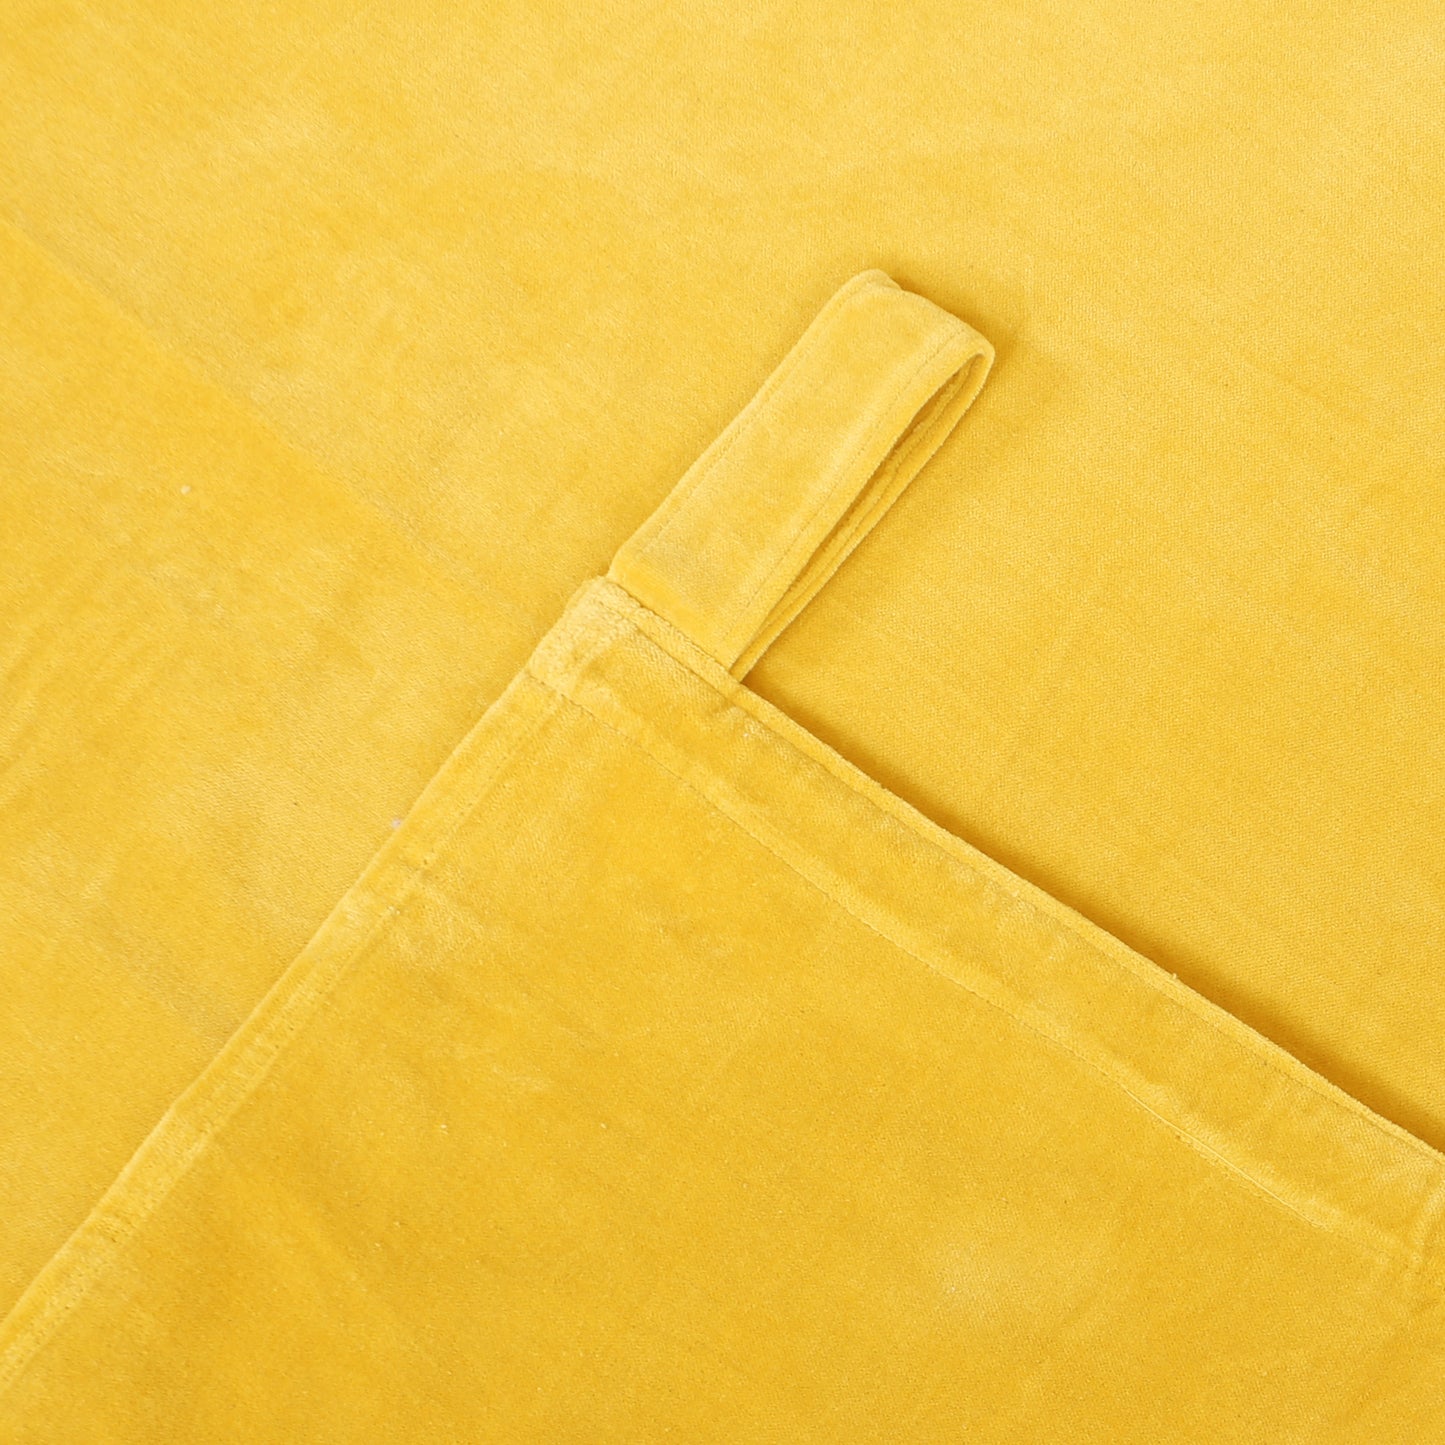 Solid Color 1 Velvet Curtain- Yellow